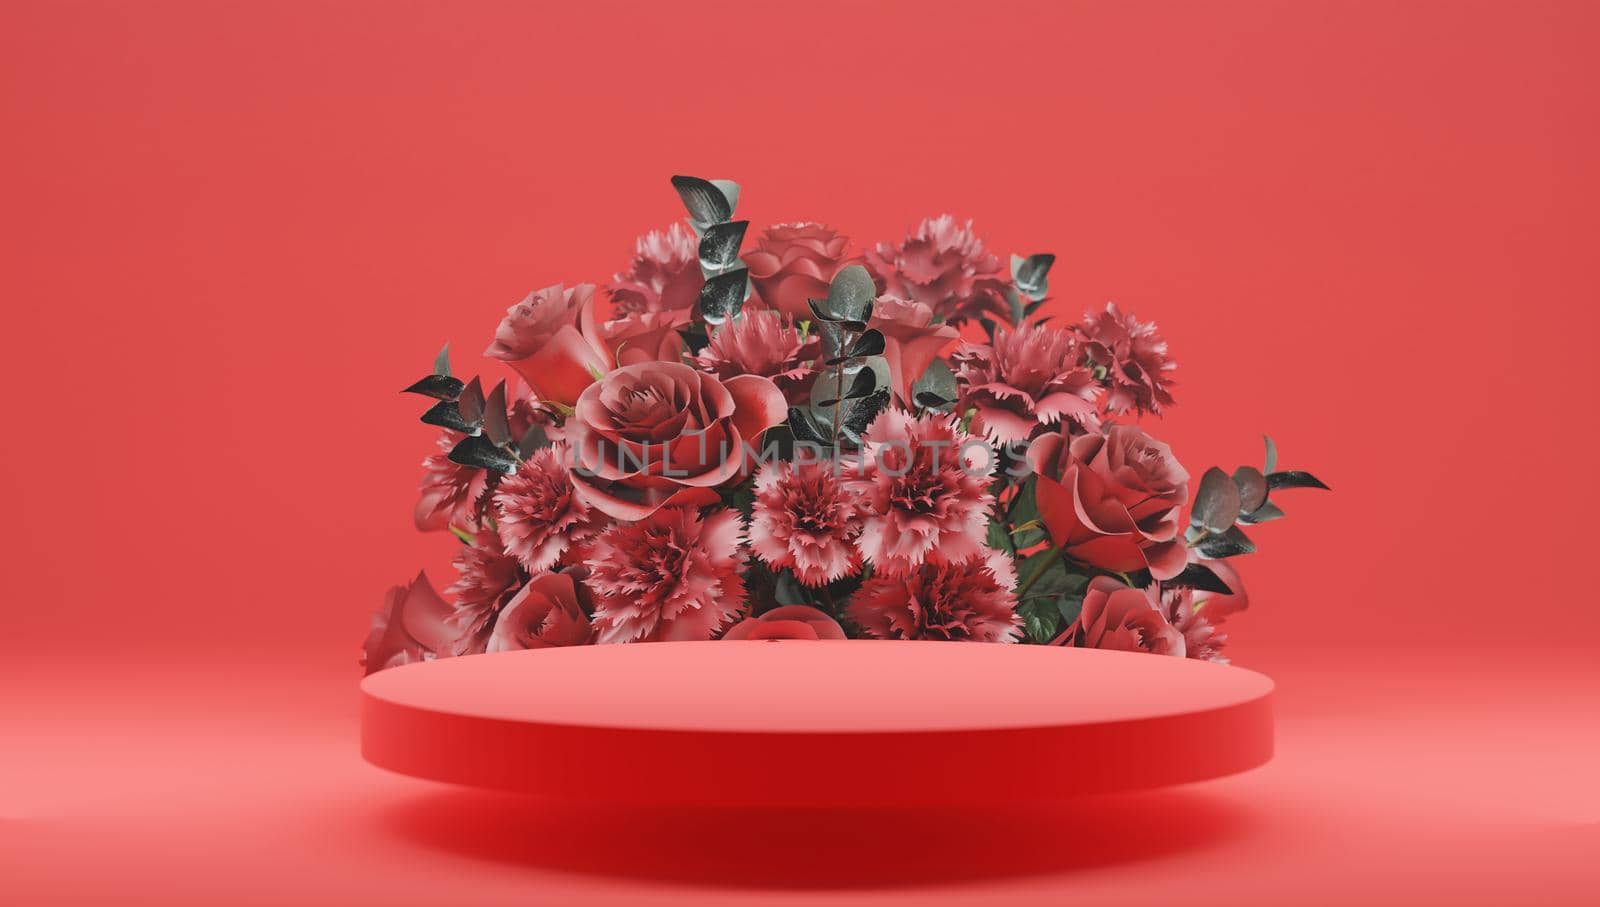 3D rendering rose flower background red color with geometric shape podium for product display, minimal concept, Premium illustration pastel floral elements, beauty, cosmetic, valentines day. by jbruiz78